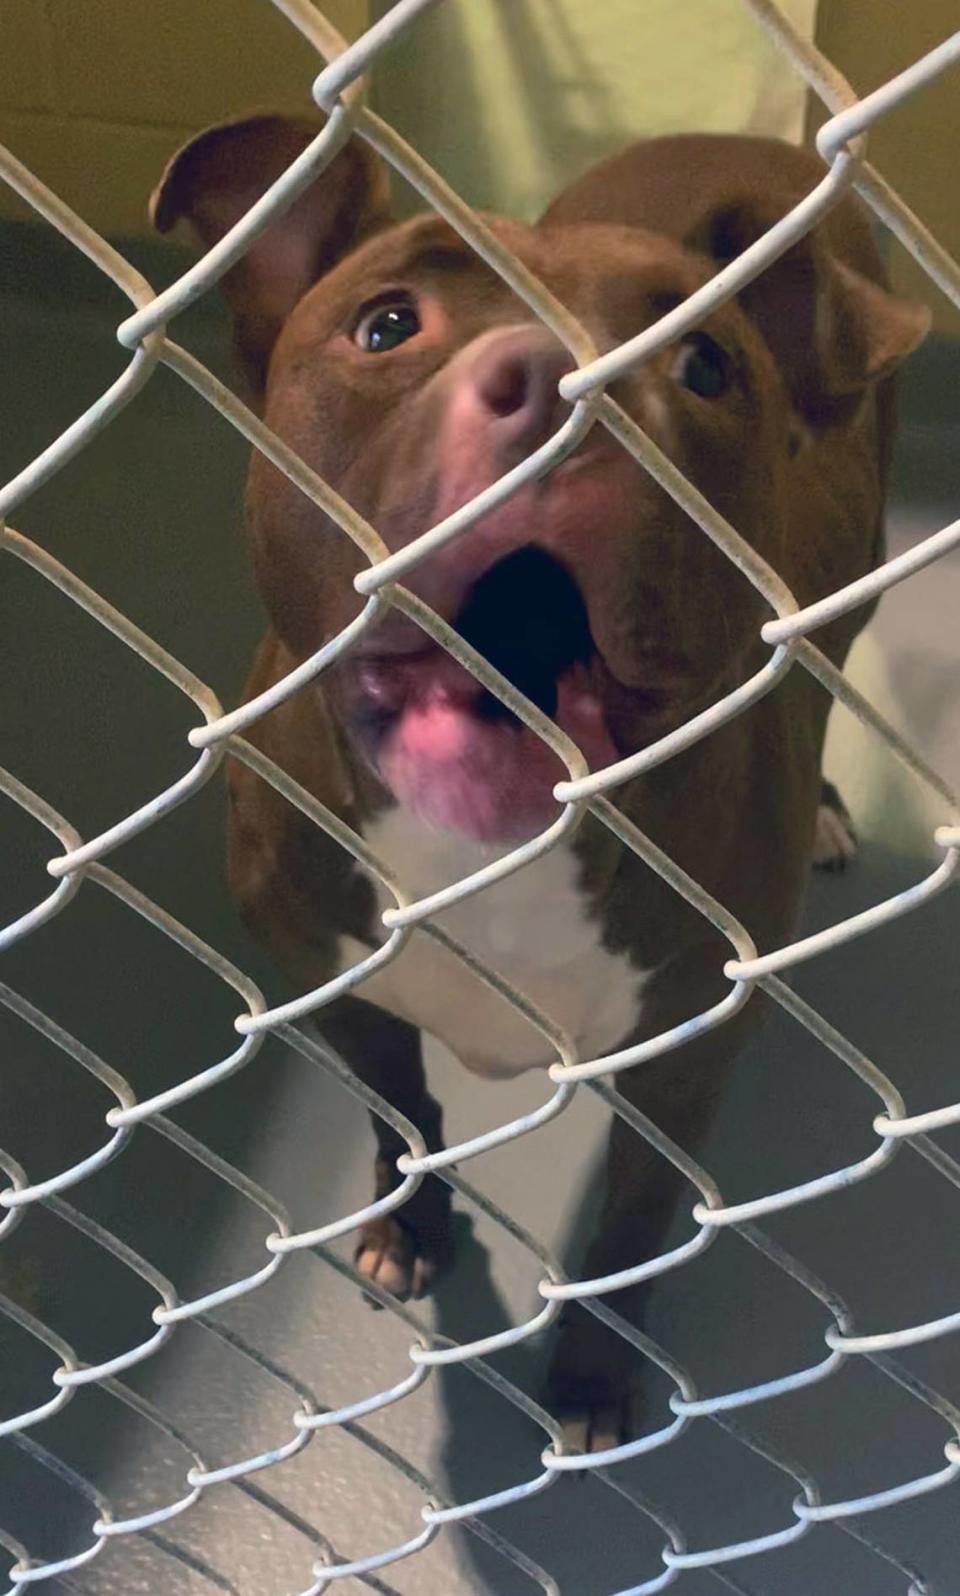 Data provided on the Animal Control Center’s website shows that a total of 193 dogs have been euthanized through September of this year due to capacity. In 2022, 94 dogs were euthanized due to capacity. Drale Short, Director of Public Works, said that there has been an increase in animals coming into the shelter and that there are multiple factors that can contribute to the rising numbers.